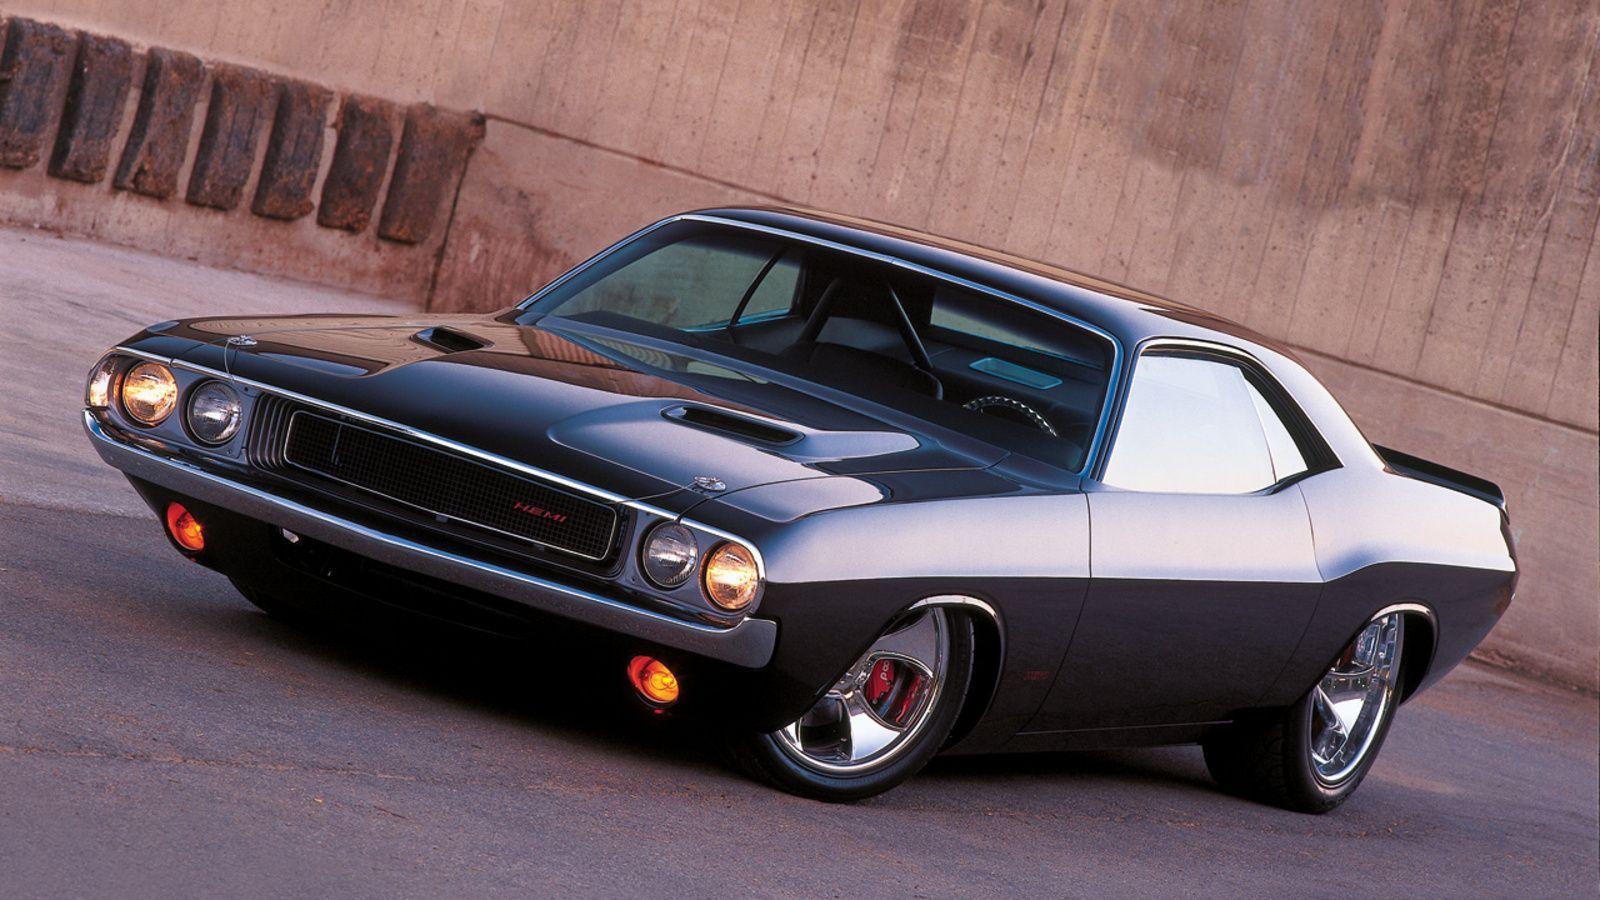 Dodge Muscle Car Wallpaper. Cars. Dodge muscle cars